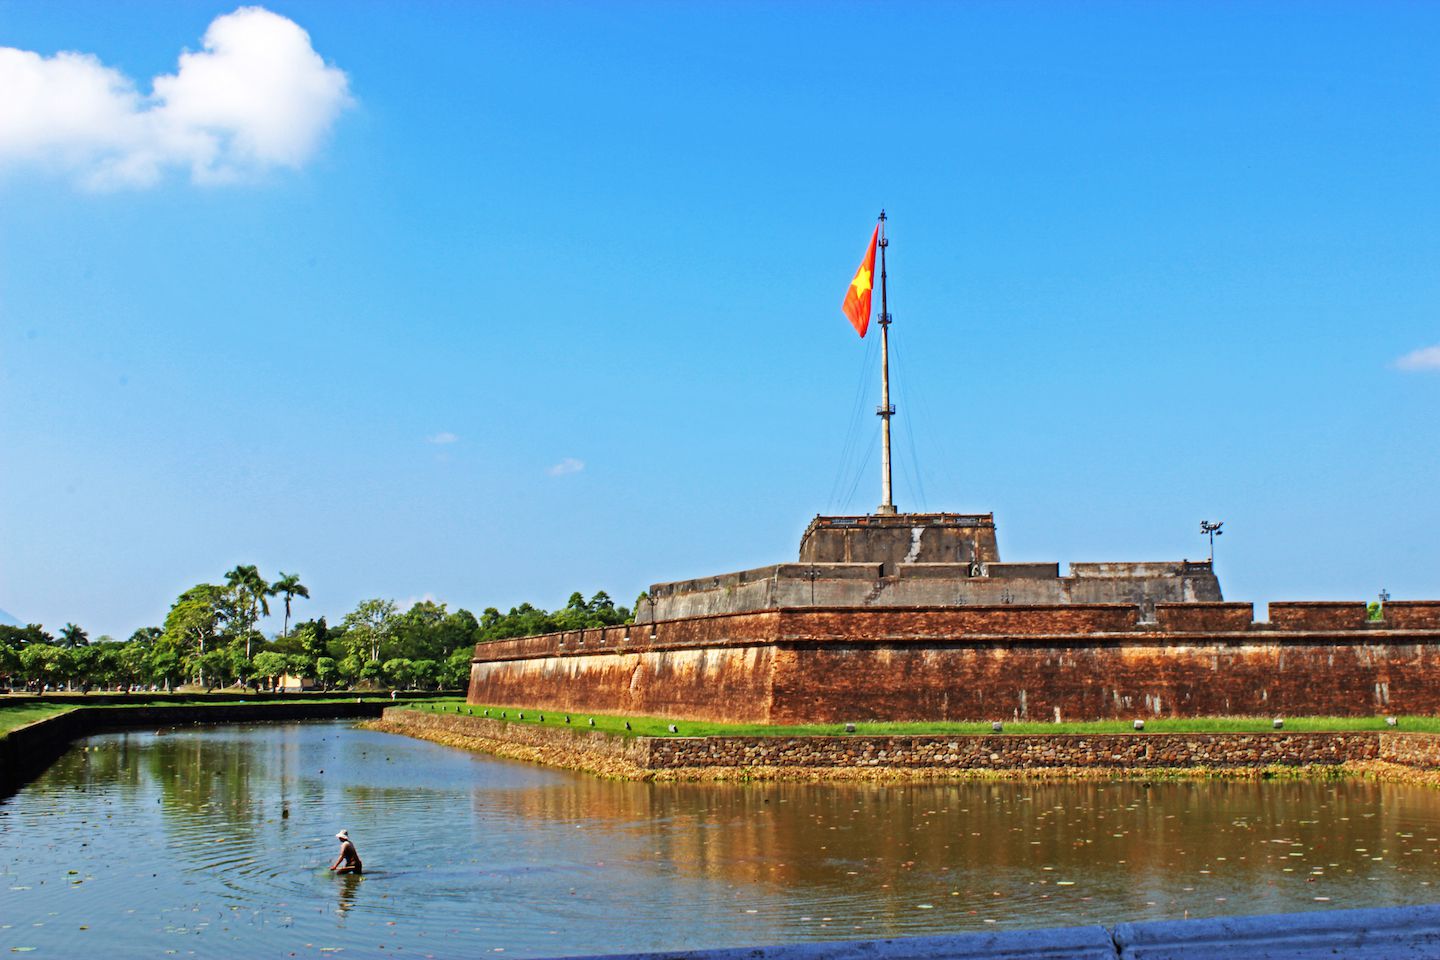 Moat surrounding the flag tower at Hue's imperial City